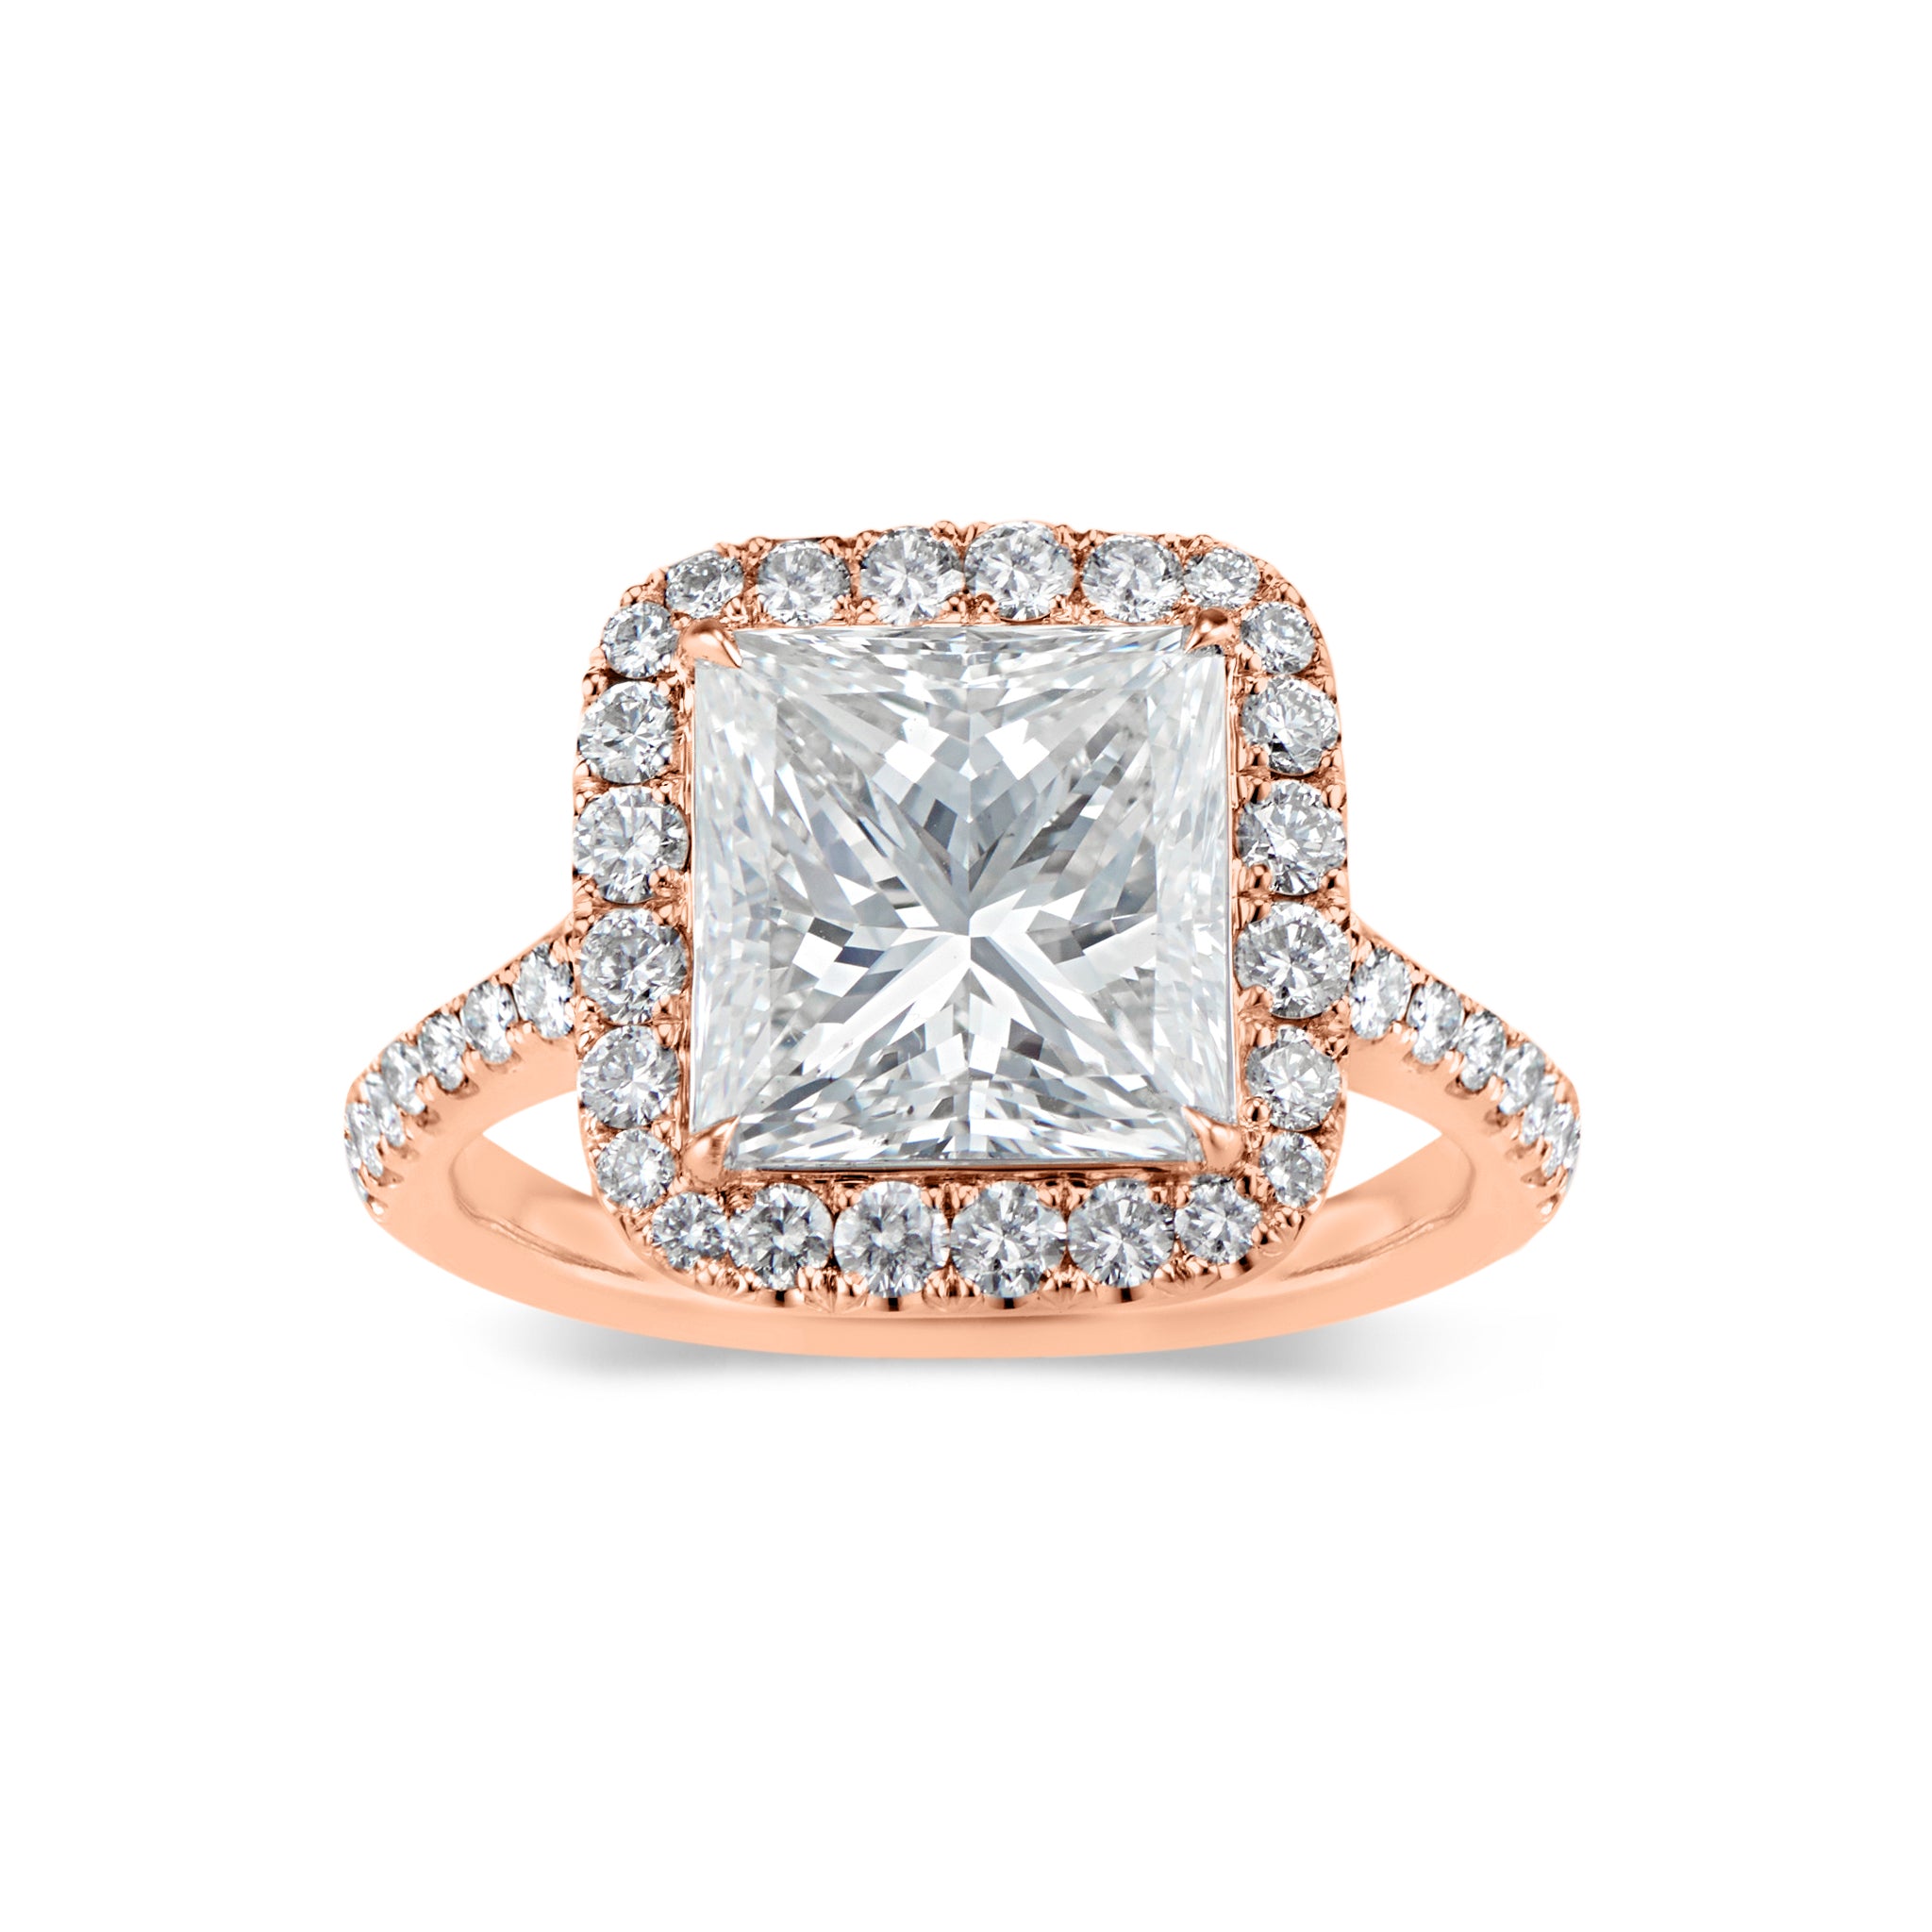 What is a halo engagement ring? | Quality Diamonds